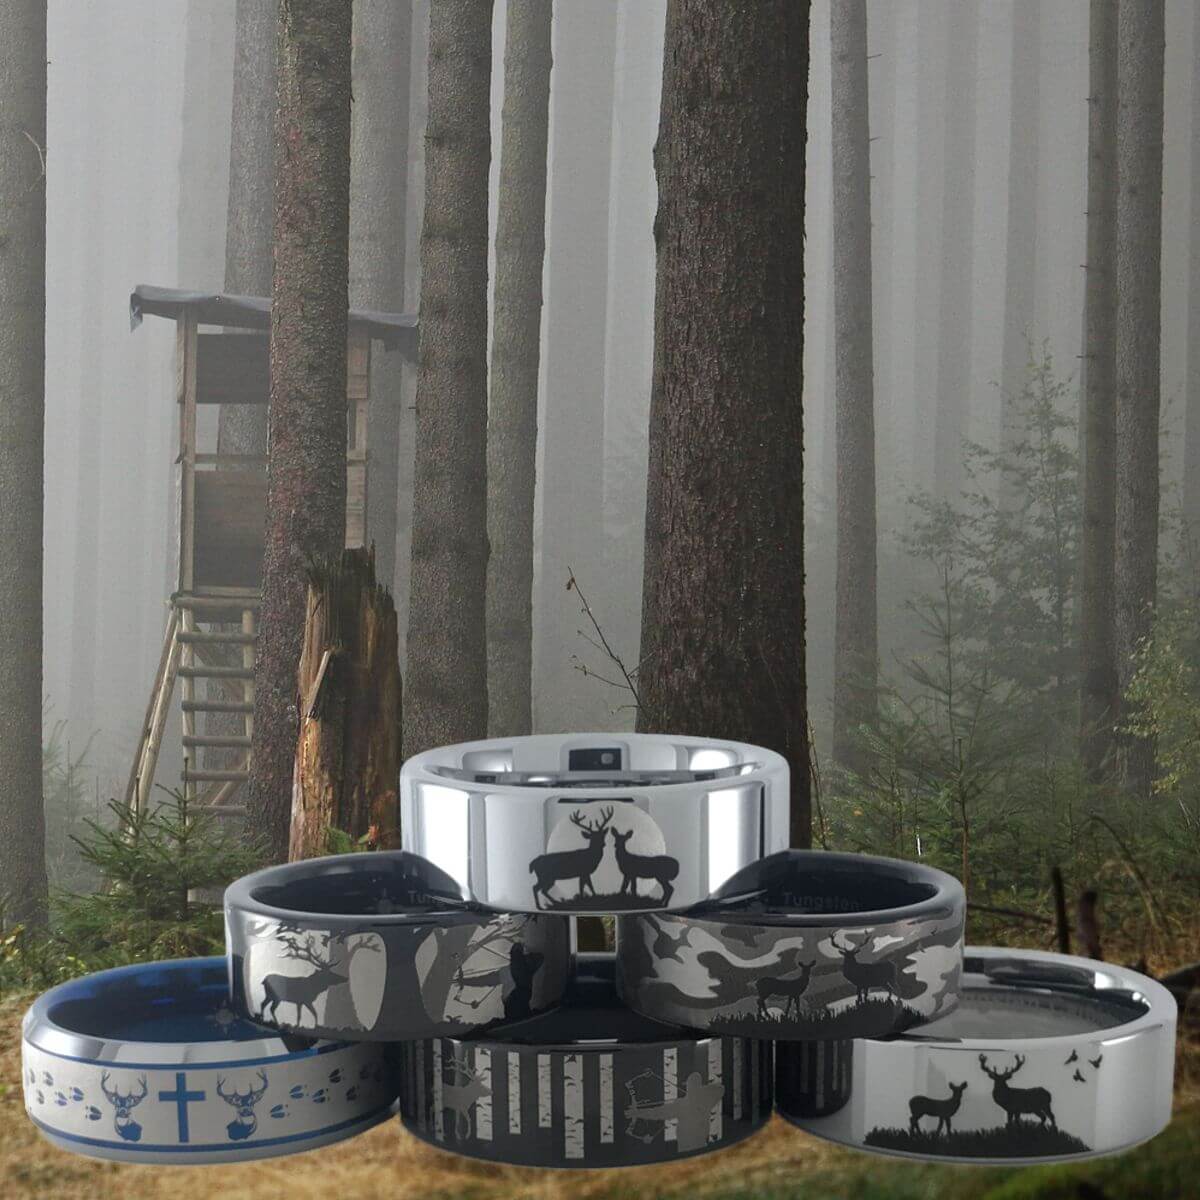 Deer and deer hunting rings stacked in pyramid with deer stand and trees background